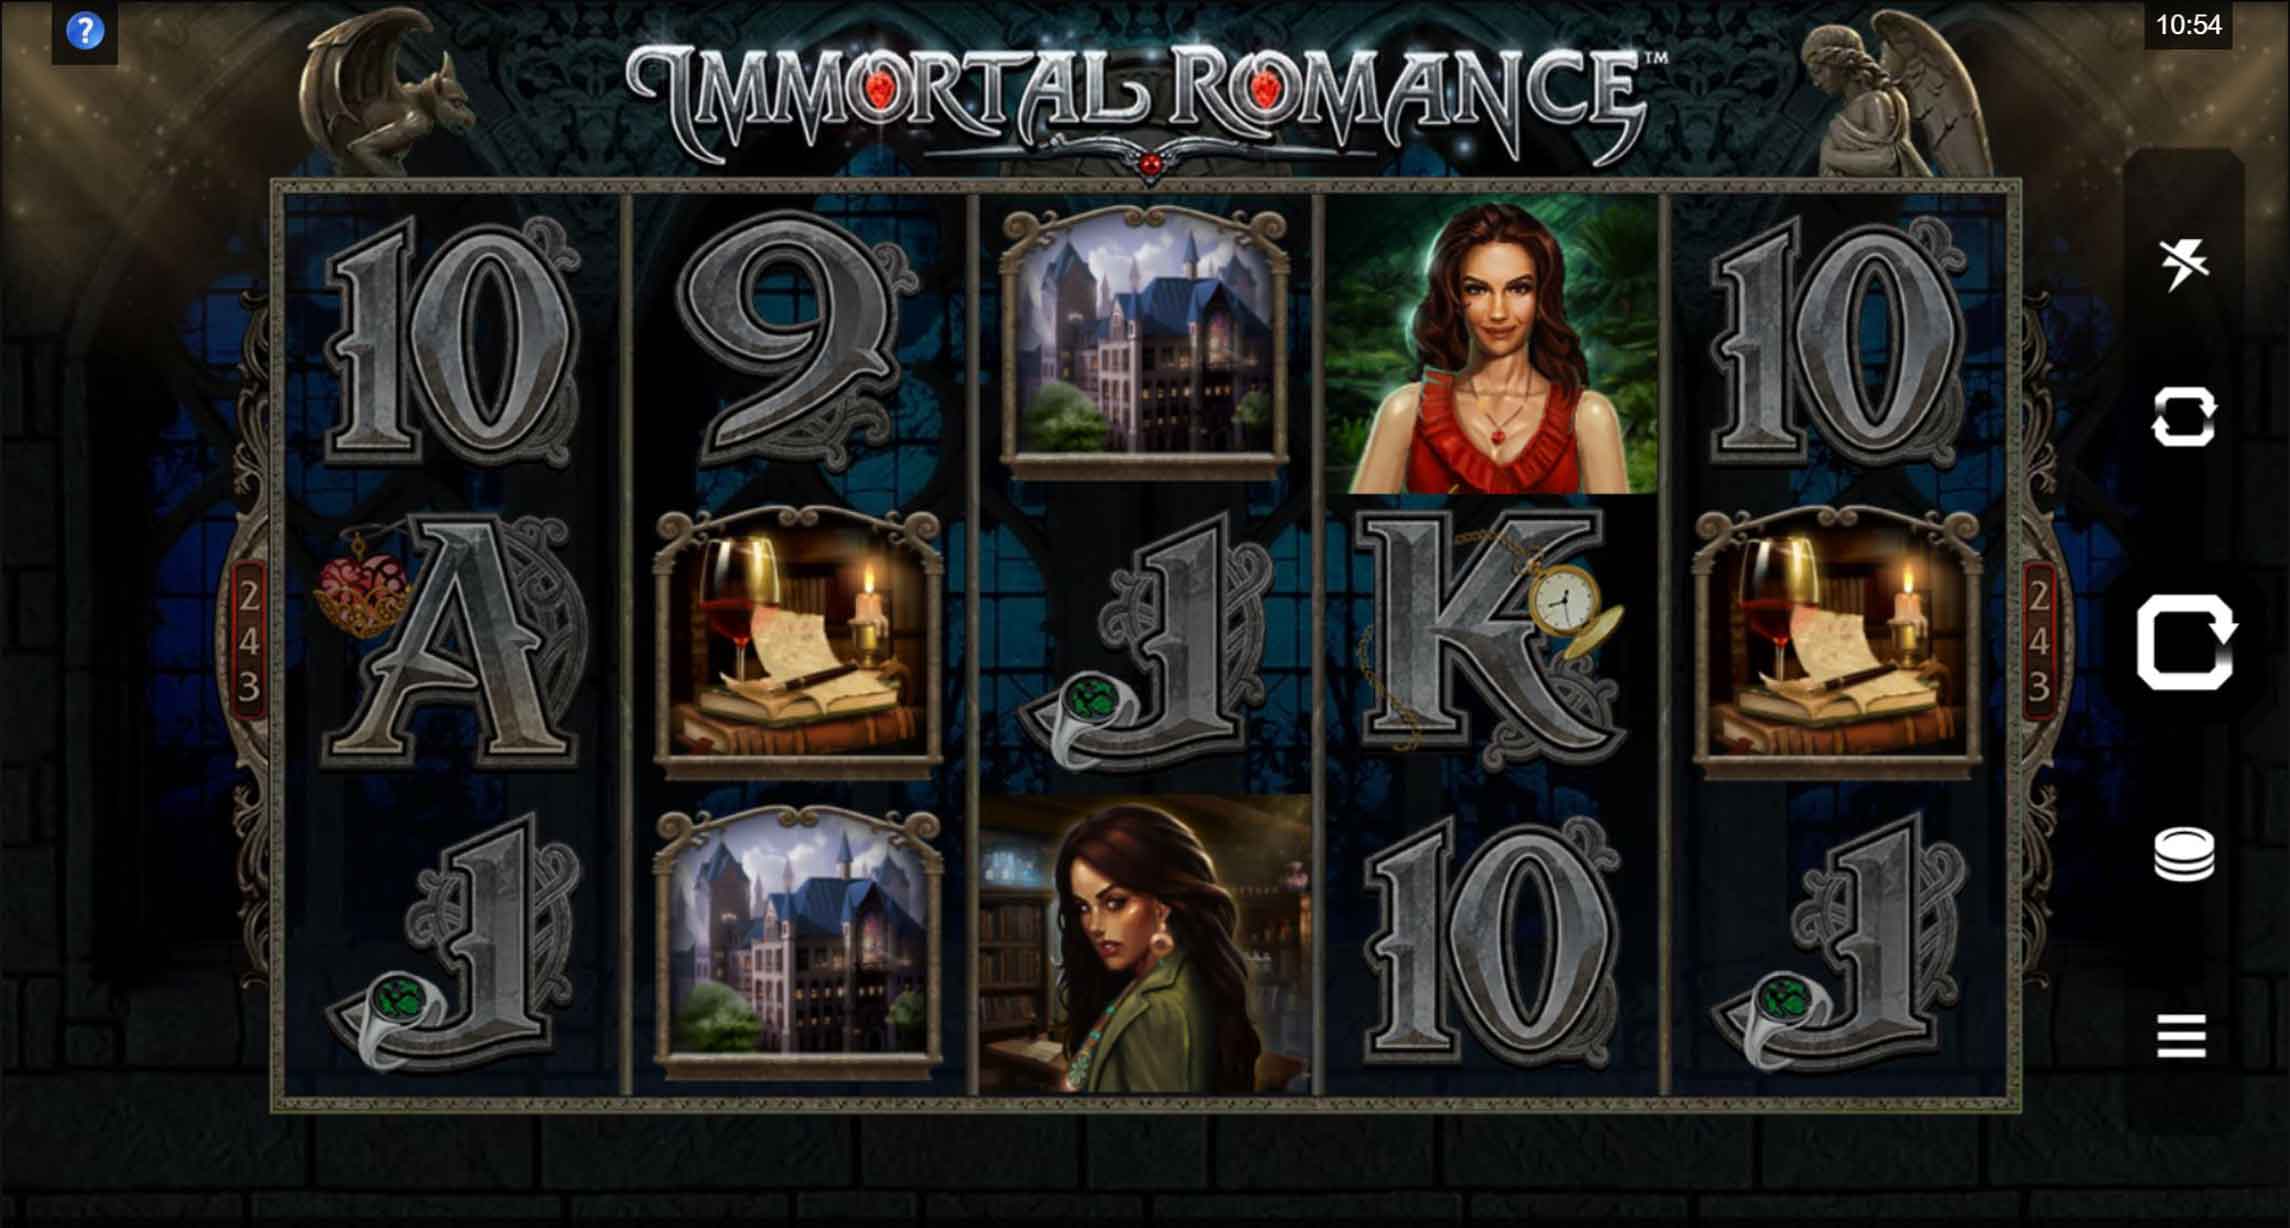 Immortal Romance - Online Slot by Microgaming